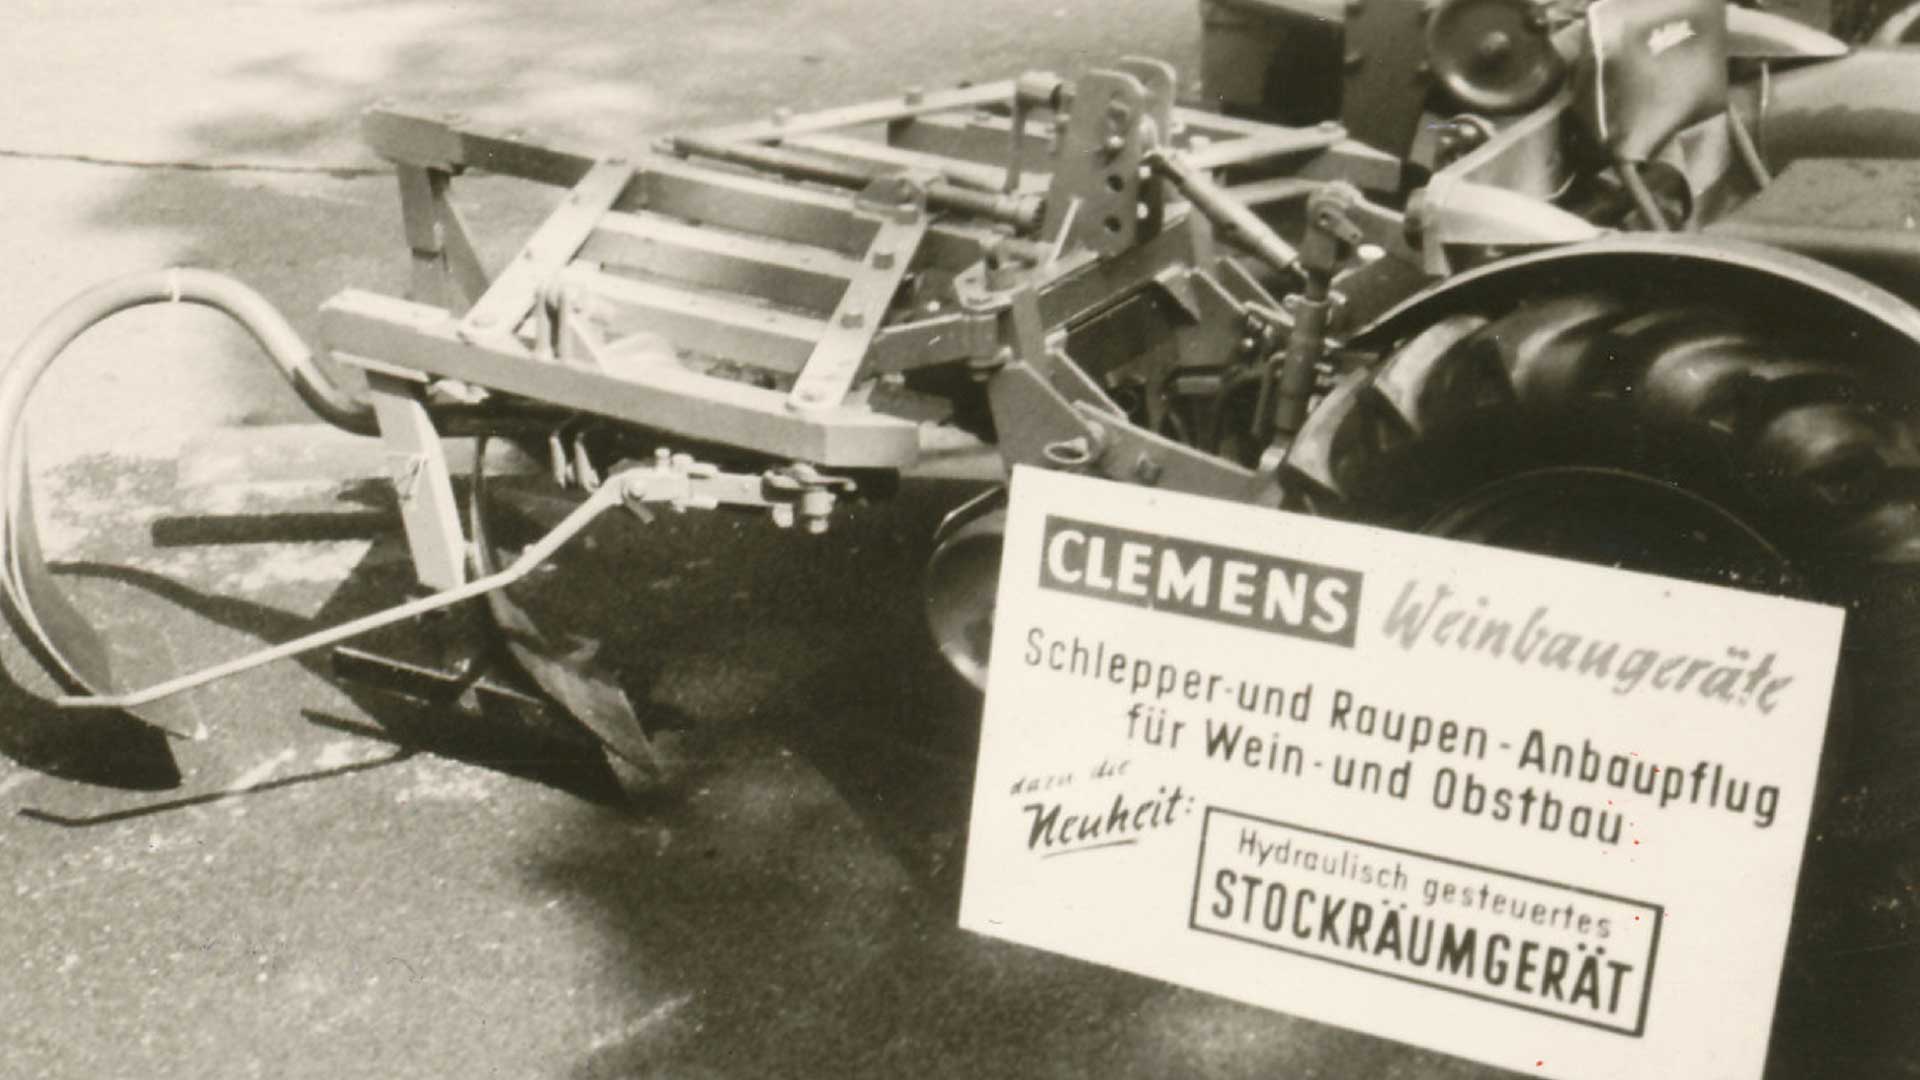 CLEMENS 1966 mounted plow with one-sided stick clearing device hydraulic